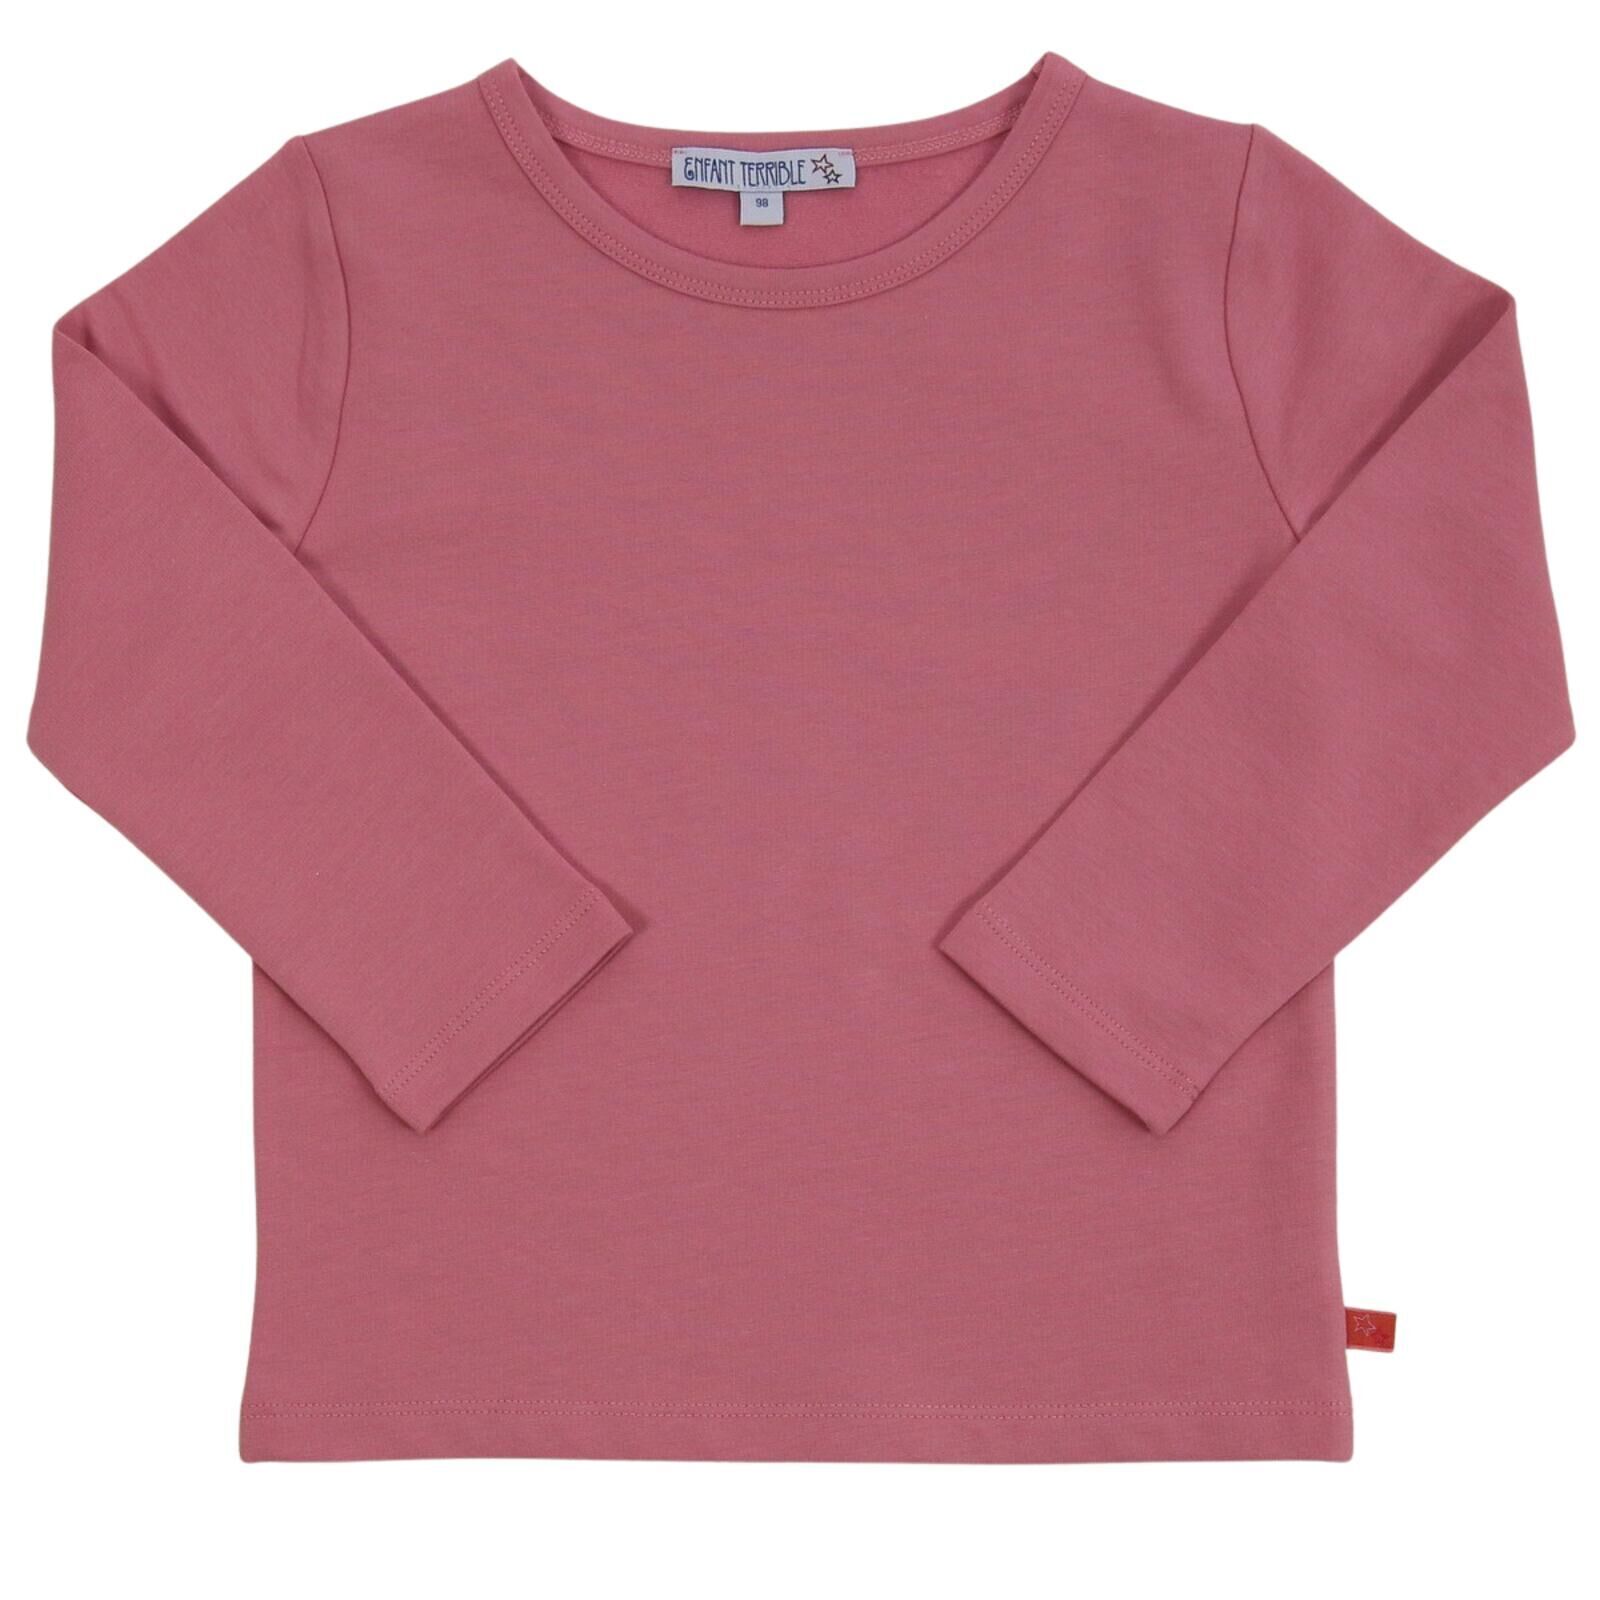 Thermo-Shirt in dusty rose von ENFANT TERRIBLE